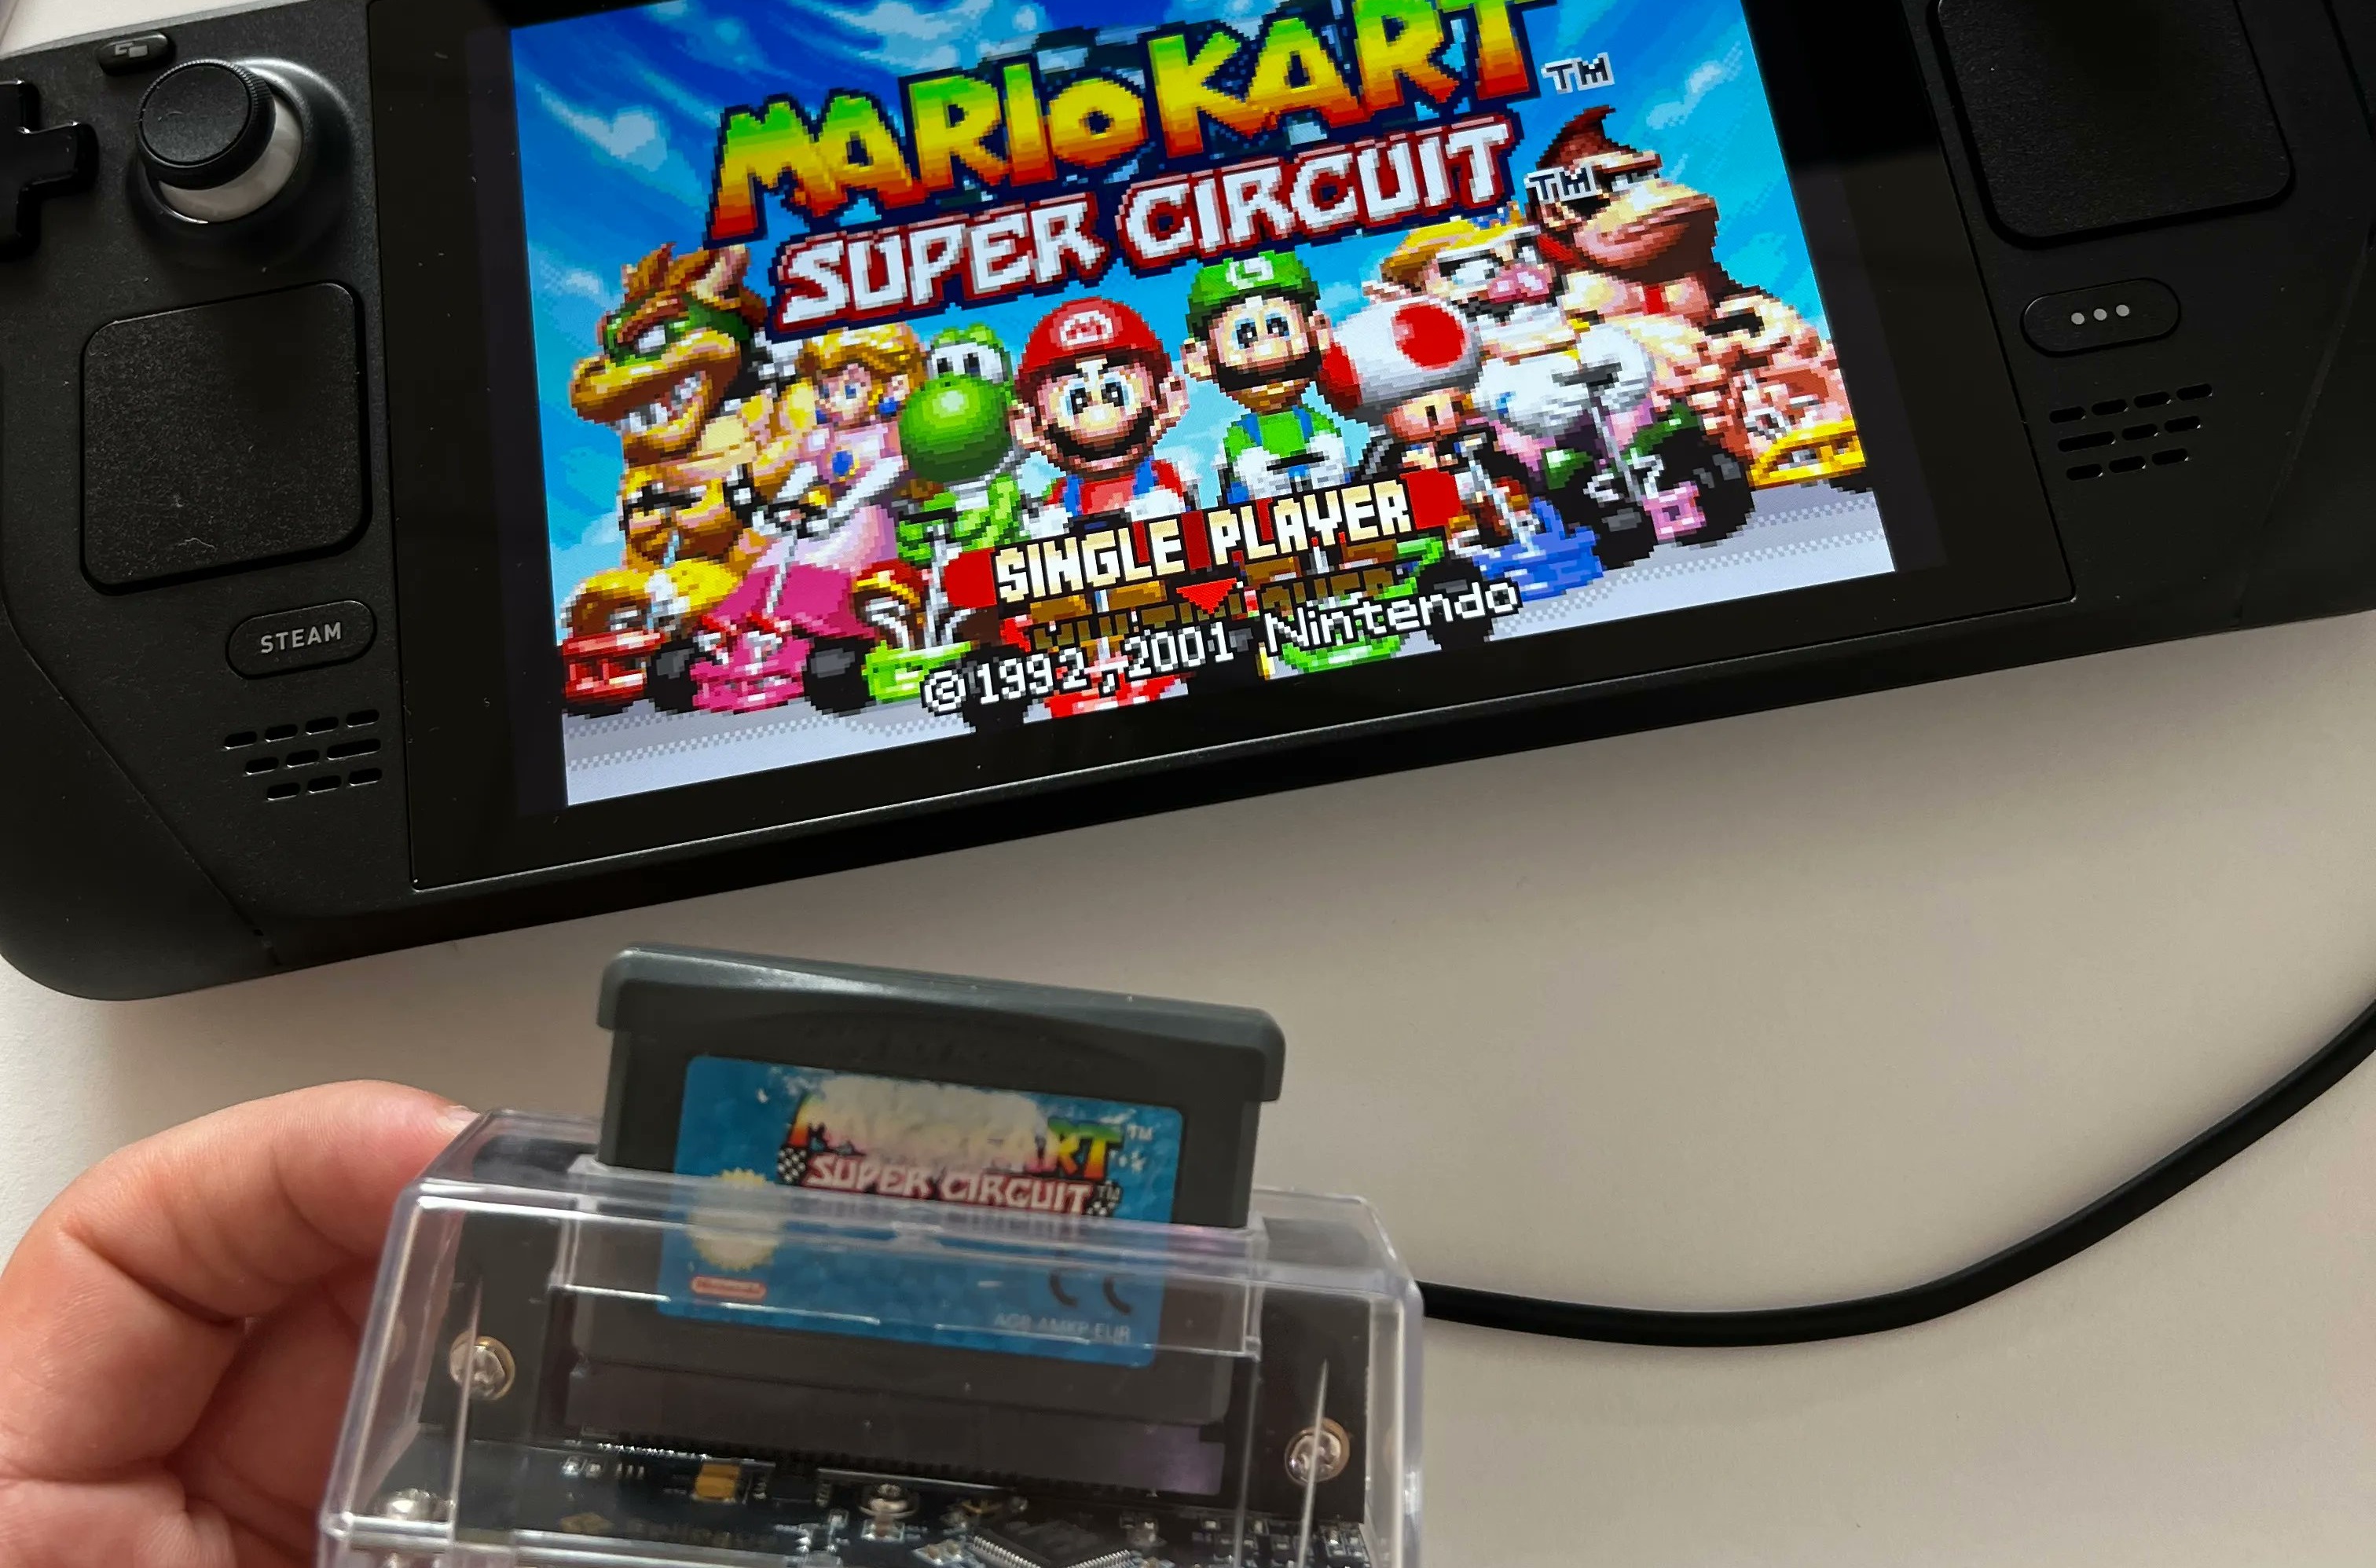  This $50 peripheral lets you plug and play GameBoy cartridges on your Steam Deck 